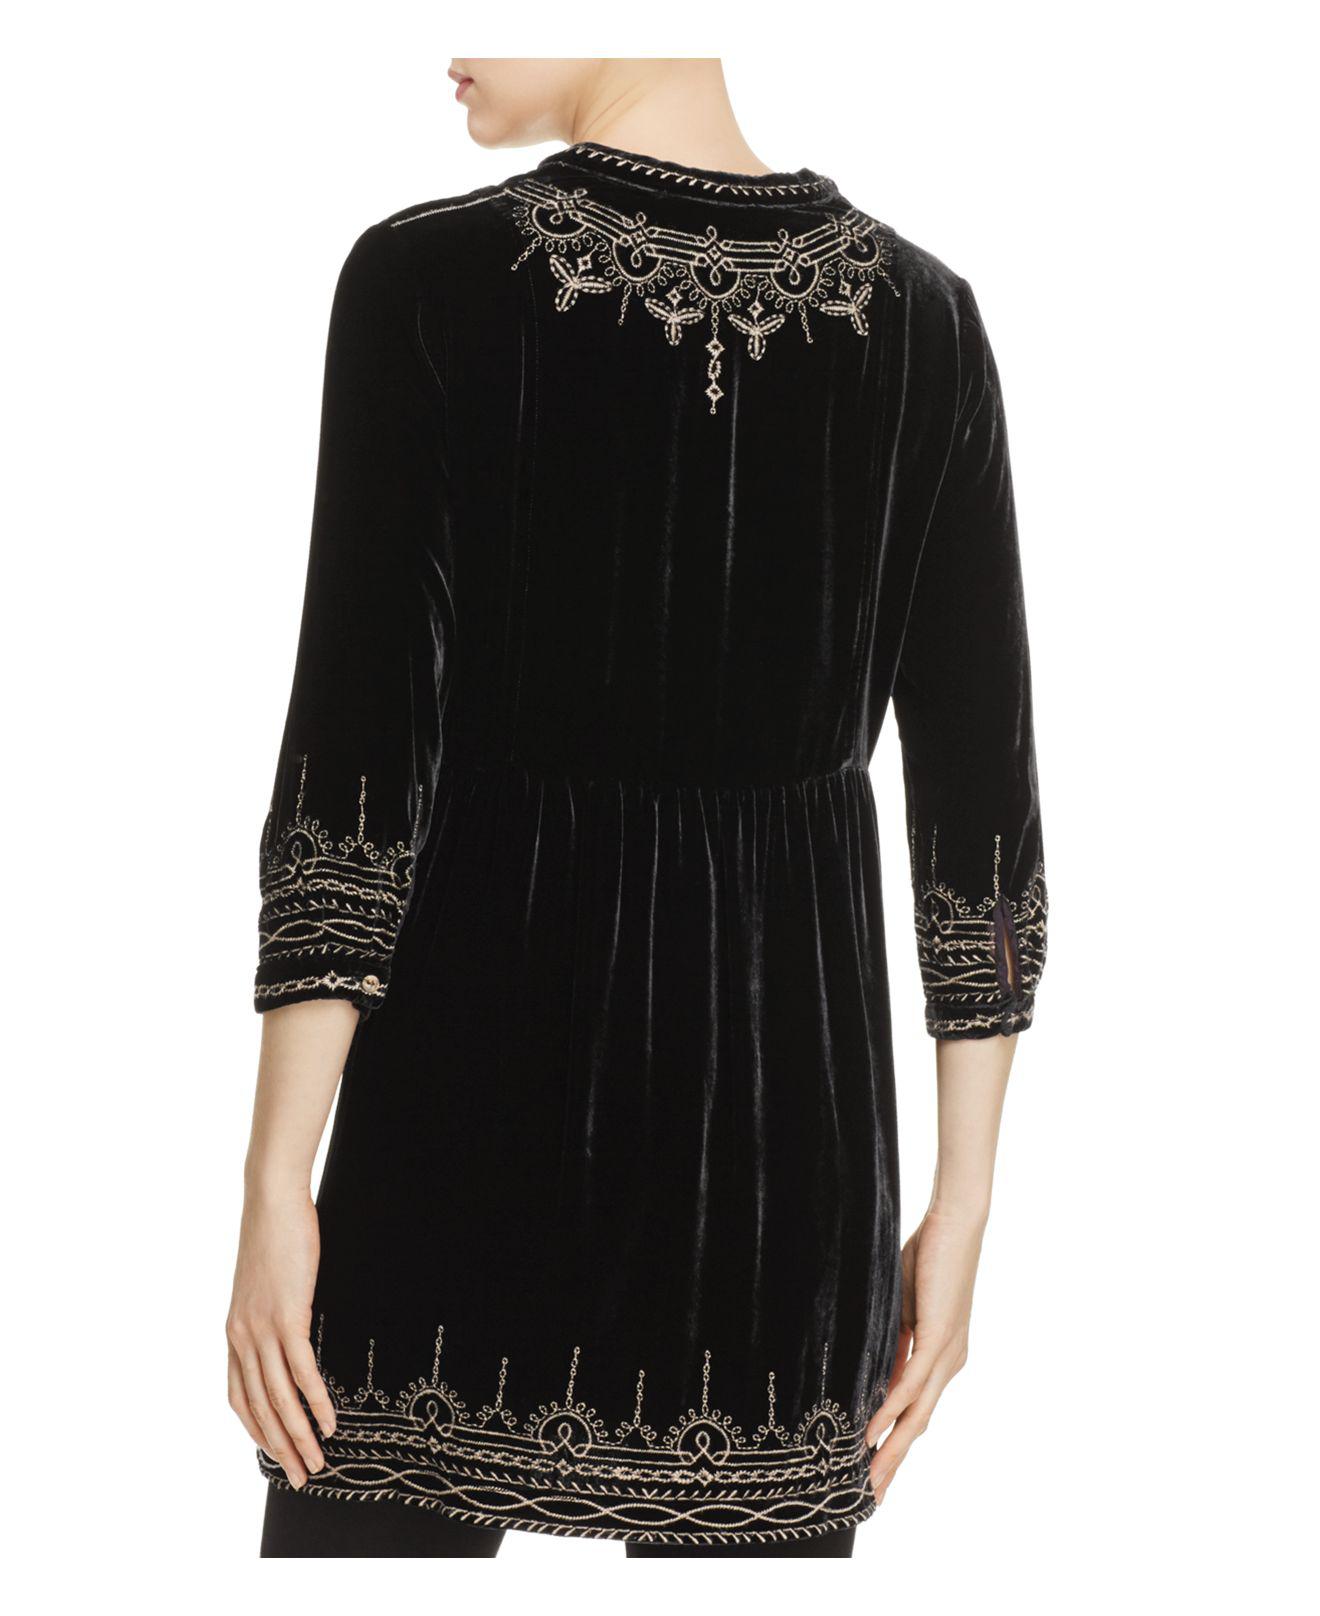 Lyst - Johnny Was Embroidered Floral Velvet Tunic Top in Black